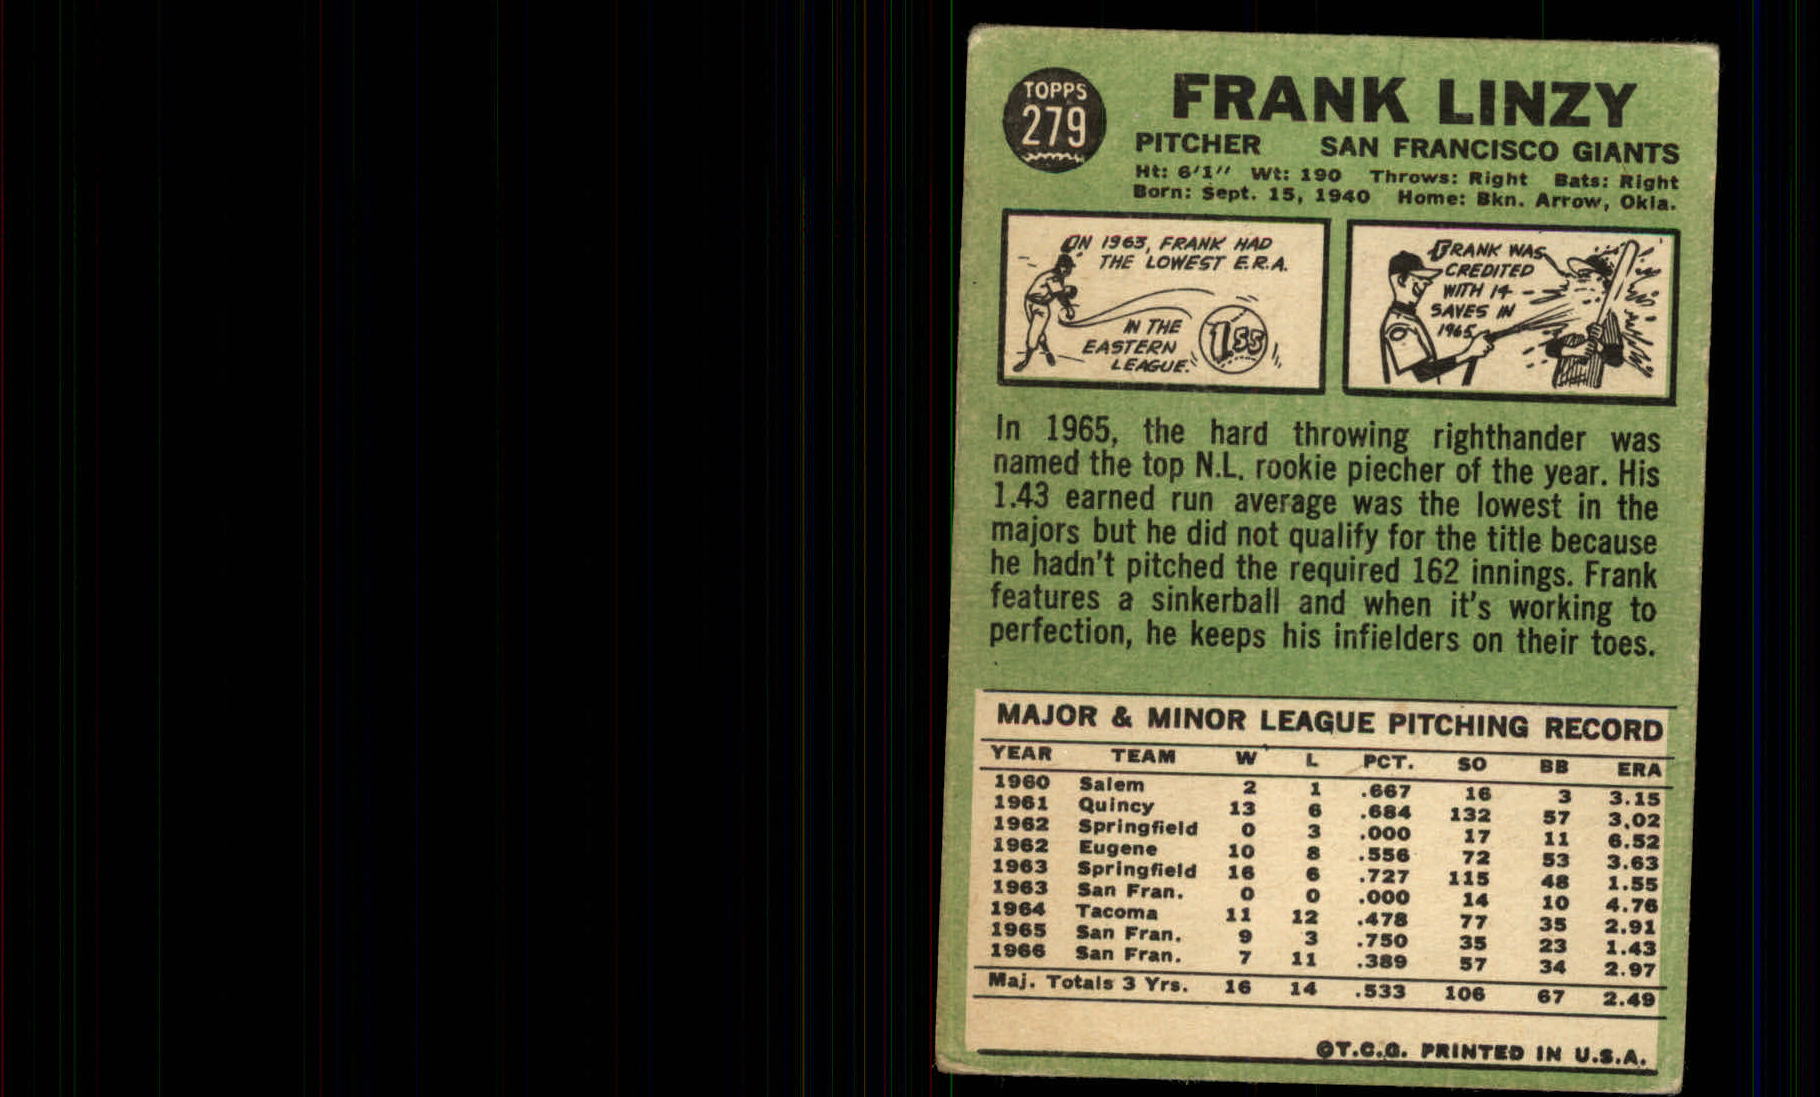 1967 Topps #279 Frank Linzy back image